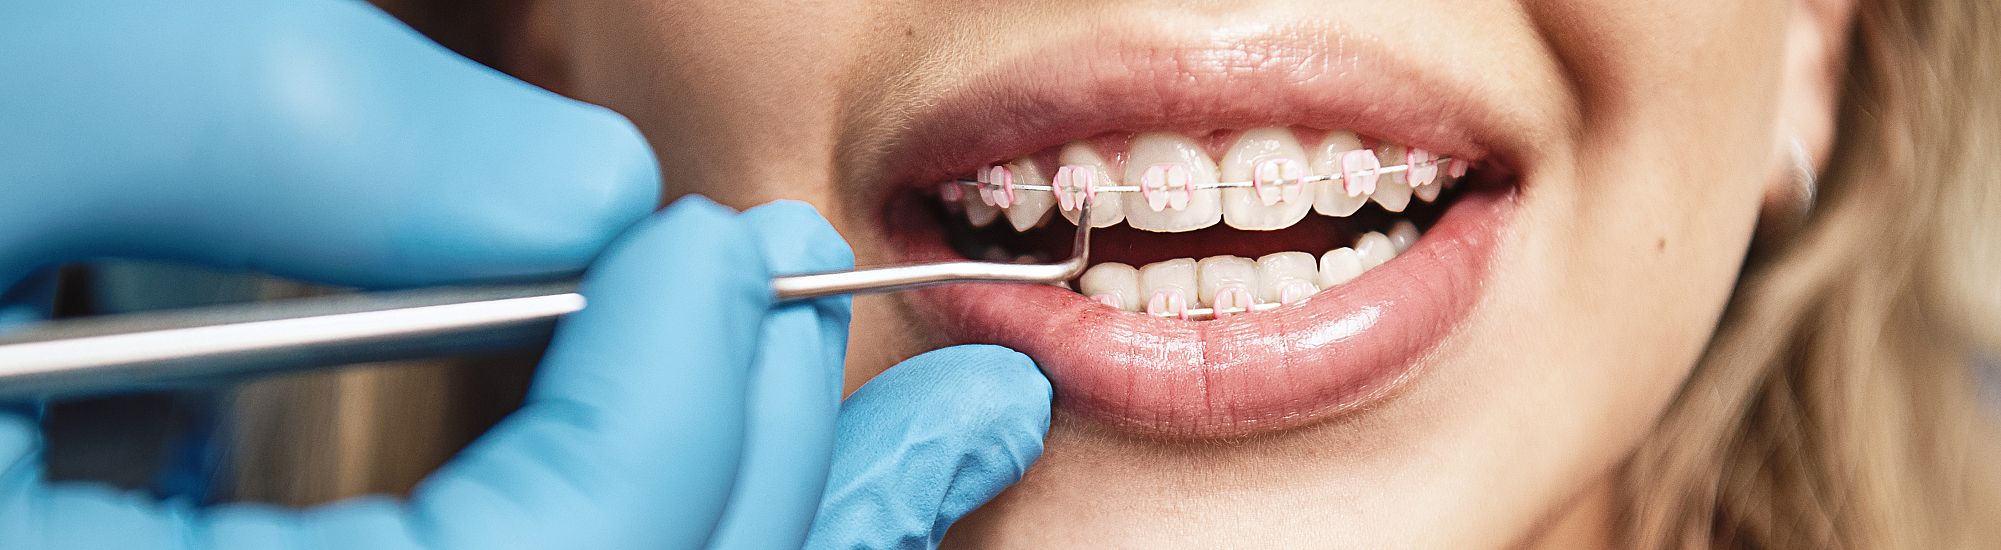 Caring for Orthodontic Braces from a Hygienist Mom’s perspective